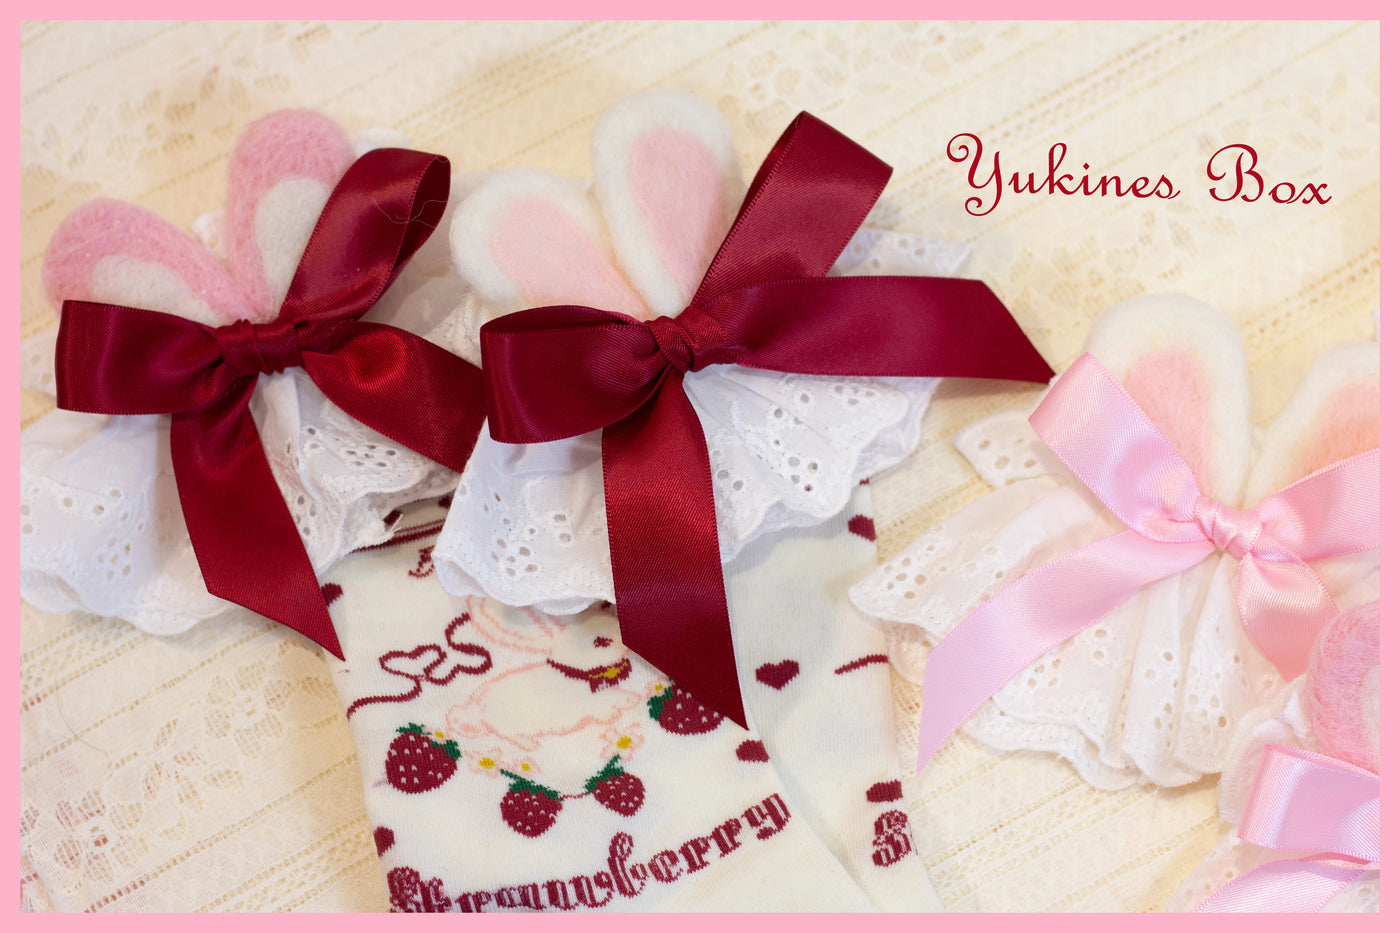 Yukines Box~Kawaii Lolita Rabbit Ear Cuffs and Ankle Lace a pair of ankle lace pink rabbit ears with pink bow 